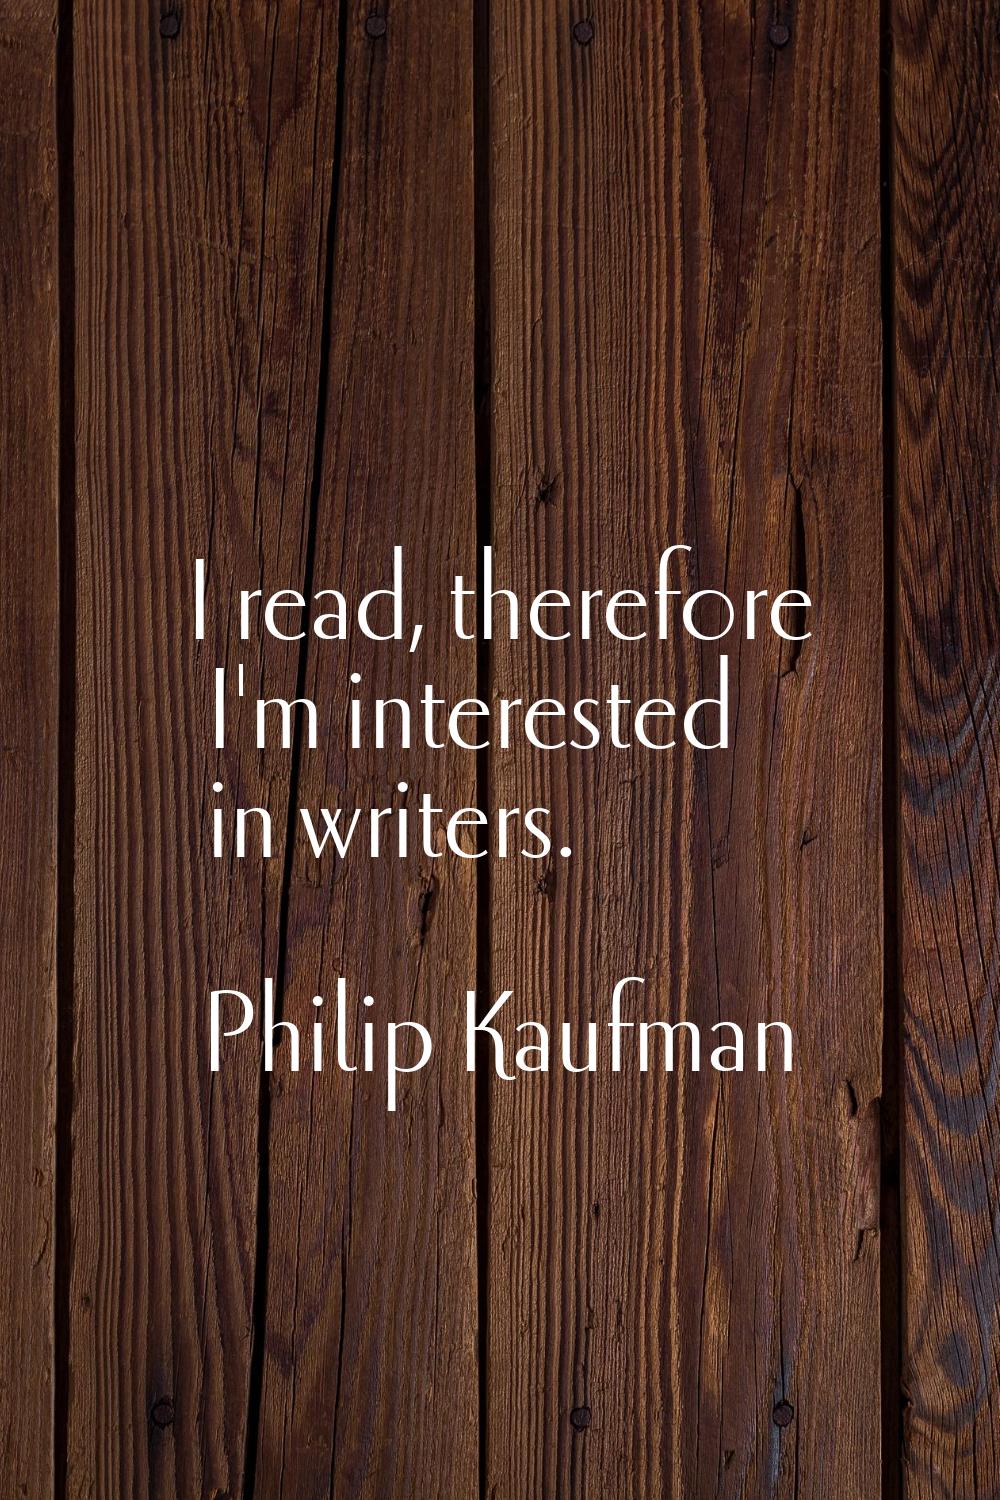 I read, therefore I'm interested in writers.